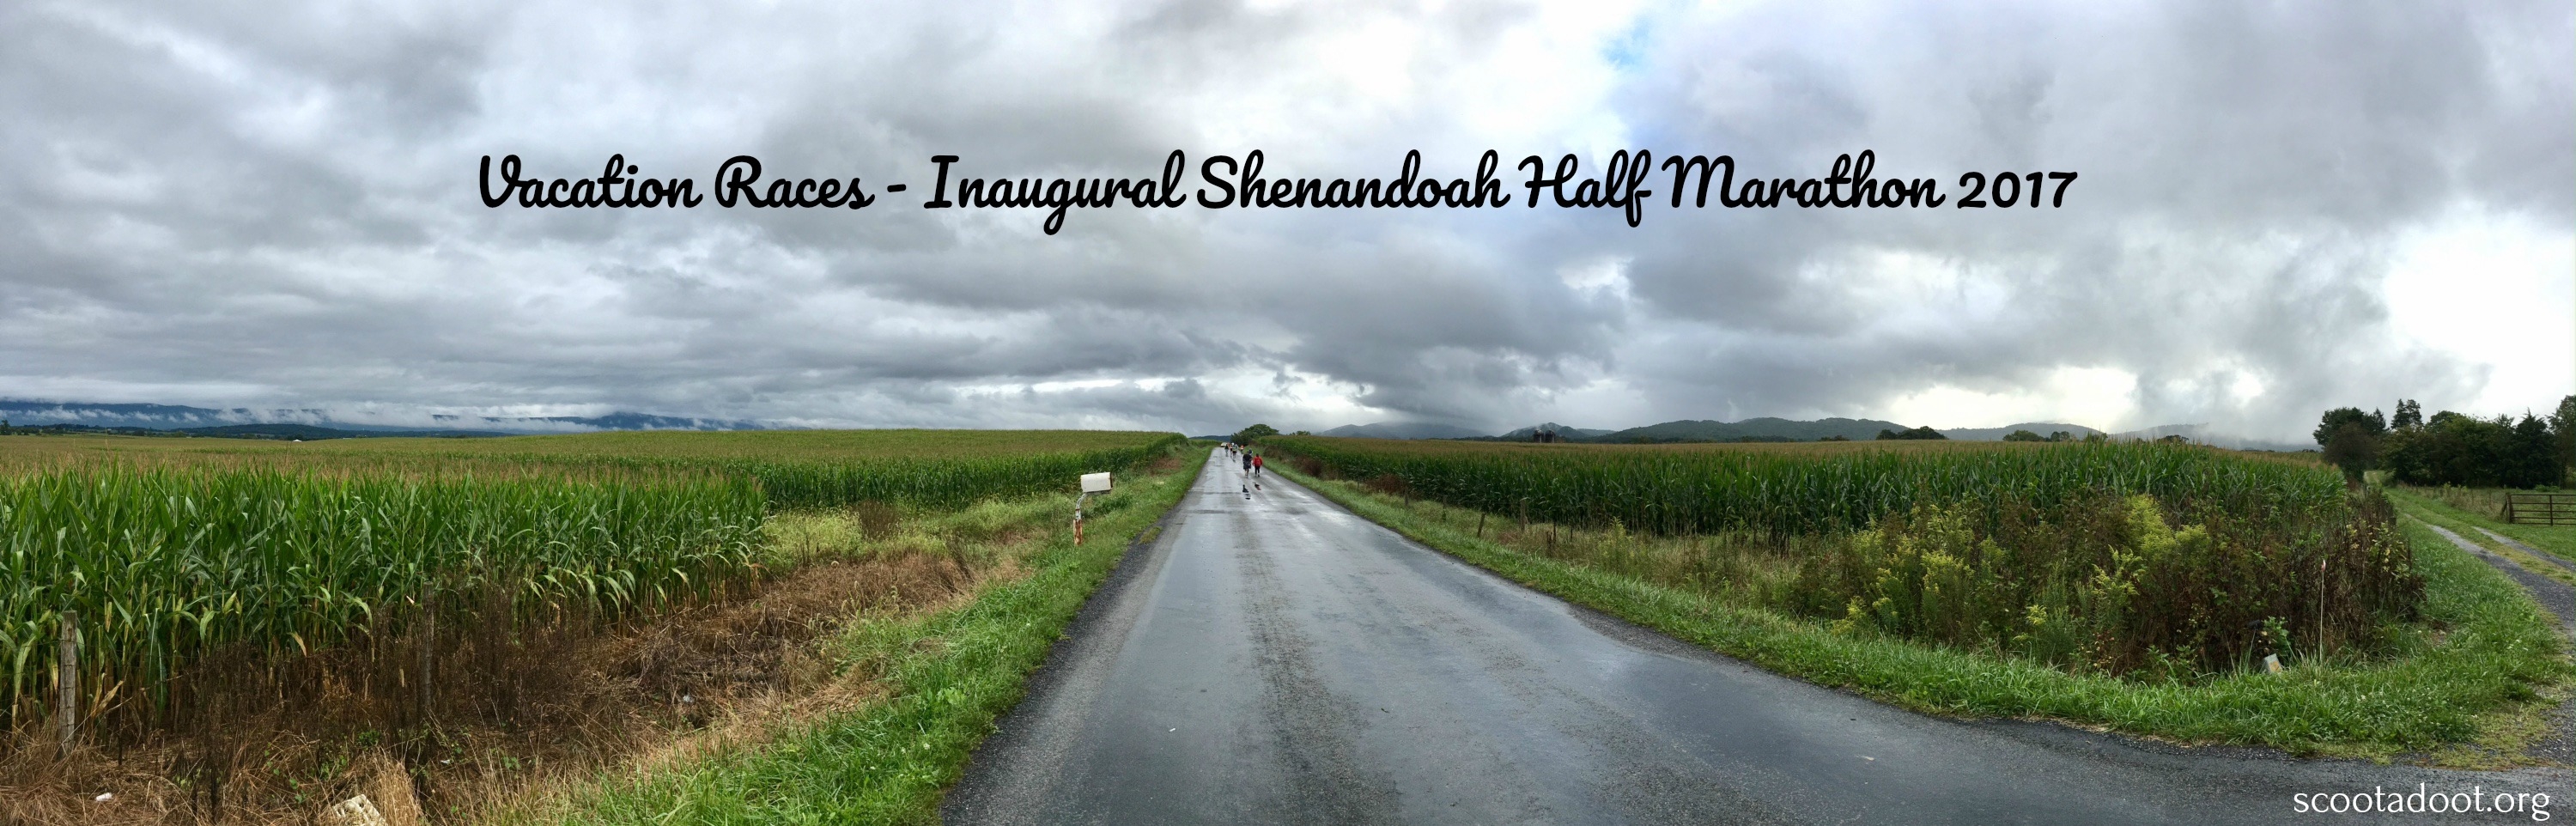 A race recap of the Inaugural Shenandoah half marathon, hosted by Vacation Races.